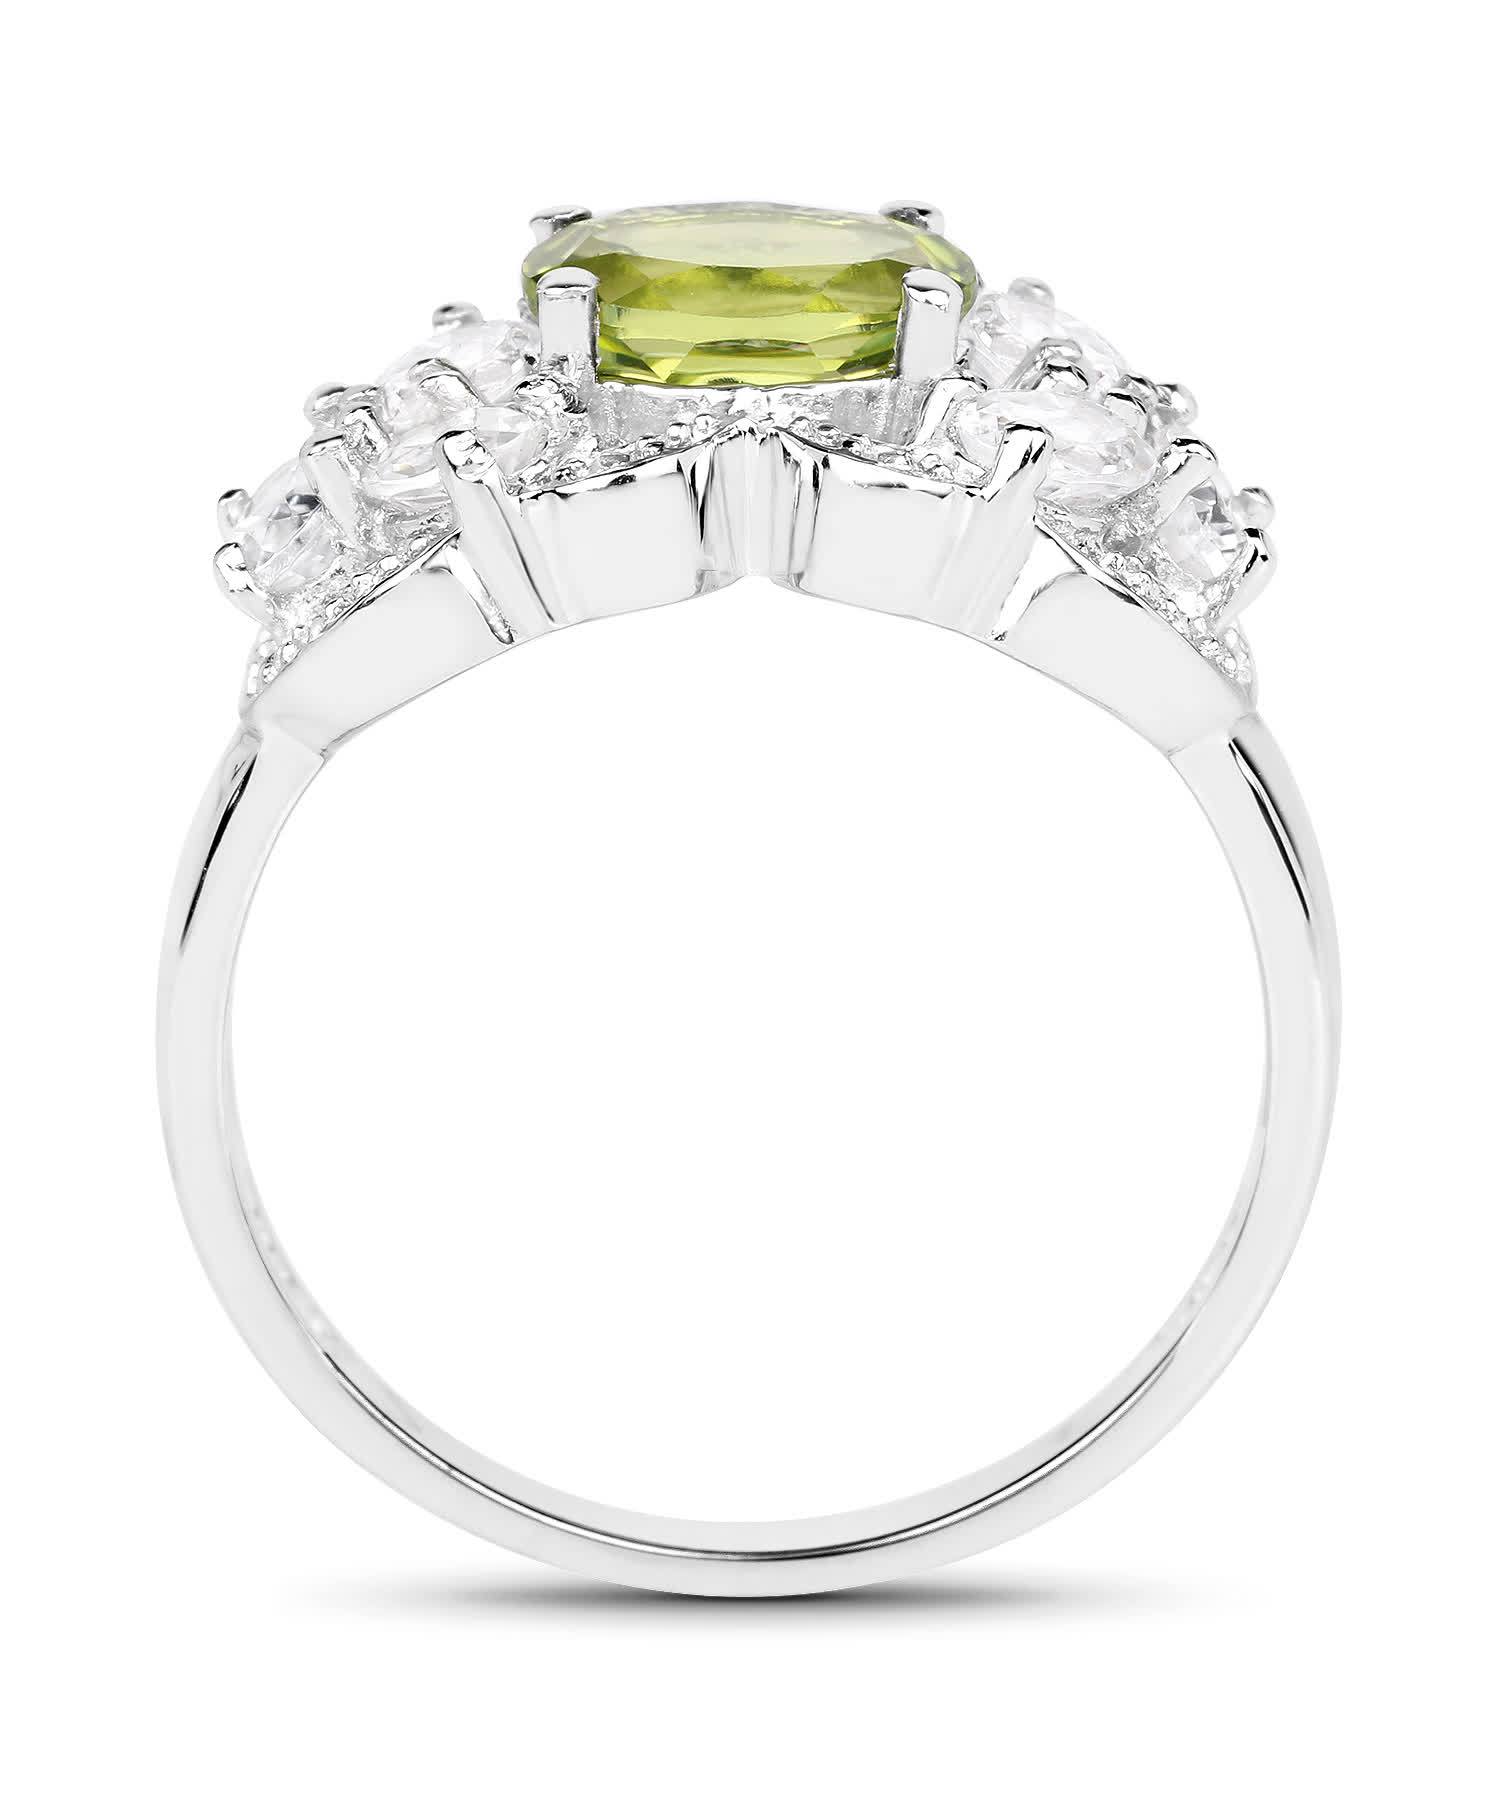 2.70ctw Natural Lime Peridot and Zircon Rhodium Plated 925 Sterling Silver Ring View 2